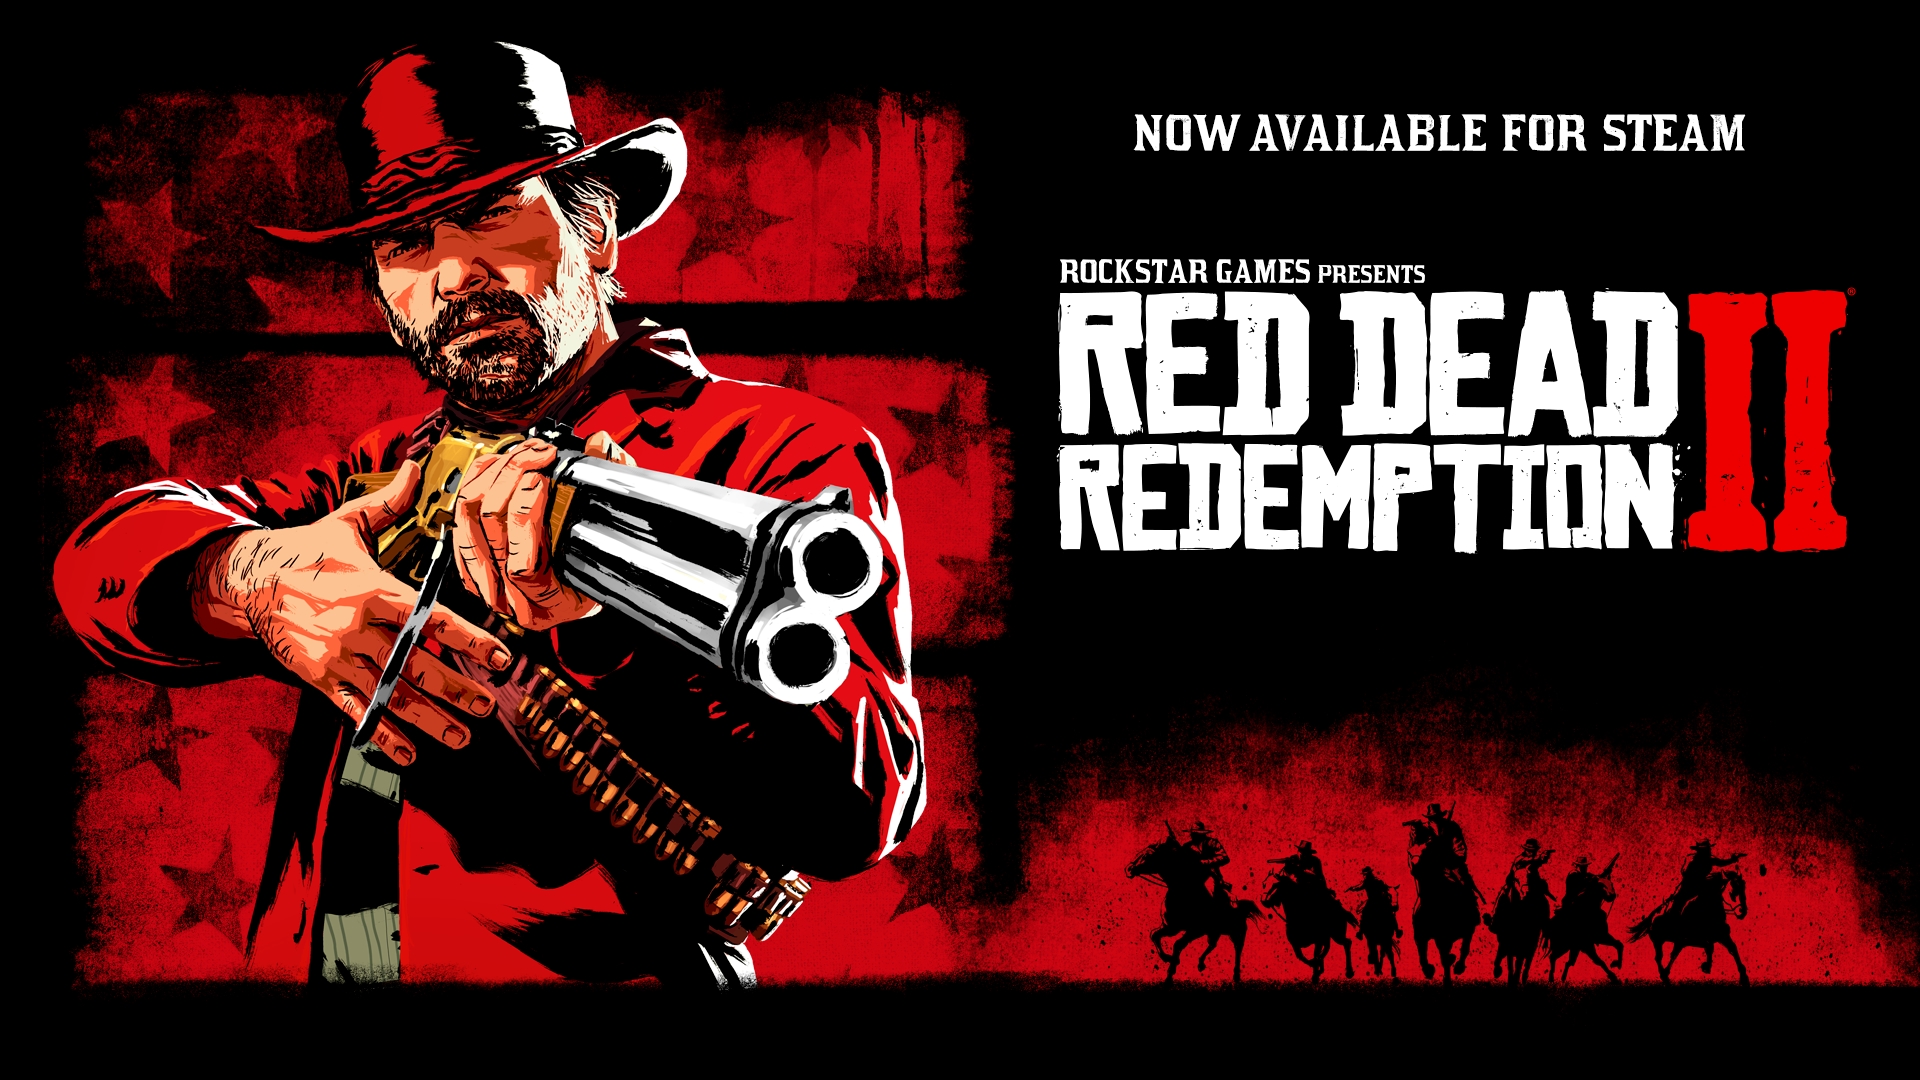 Red Dead Redemption 2 For PC Now Available on Steam